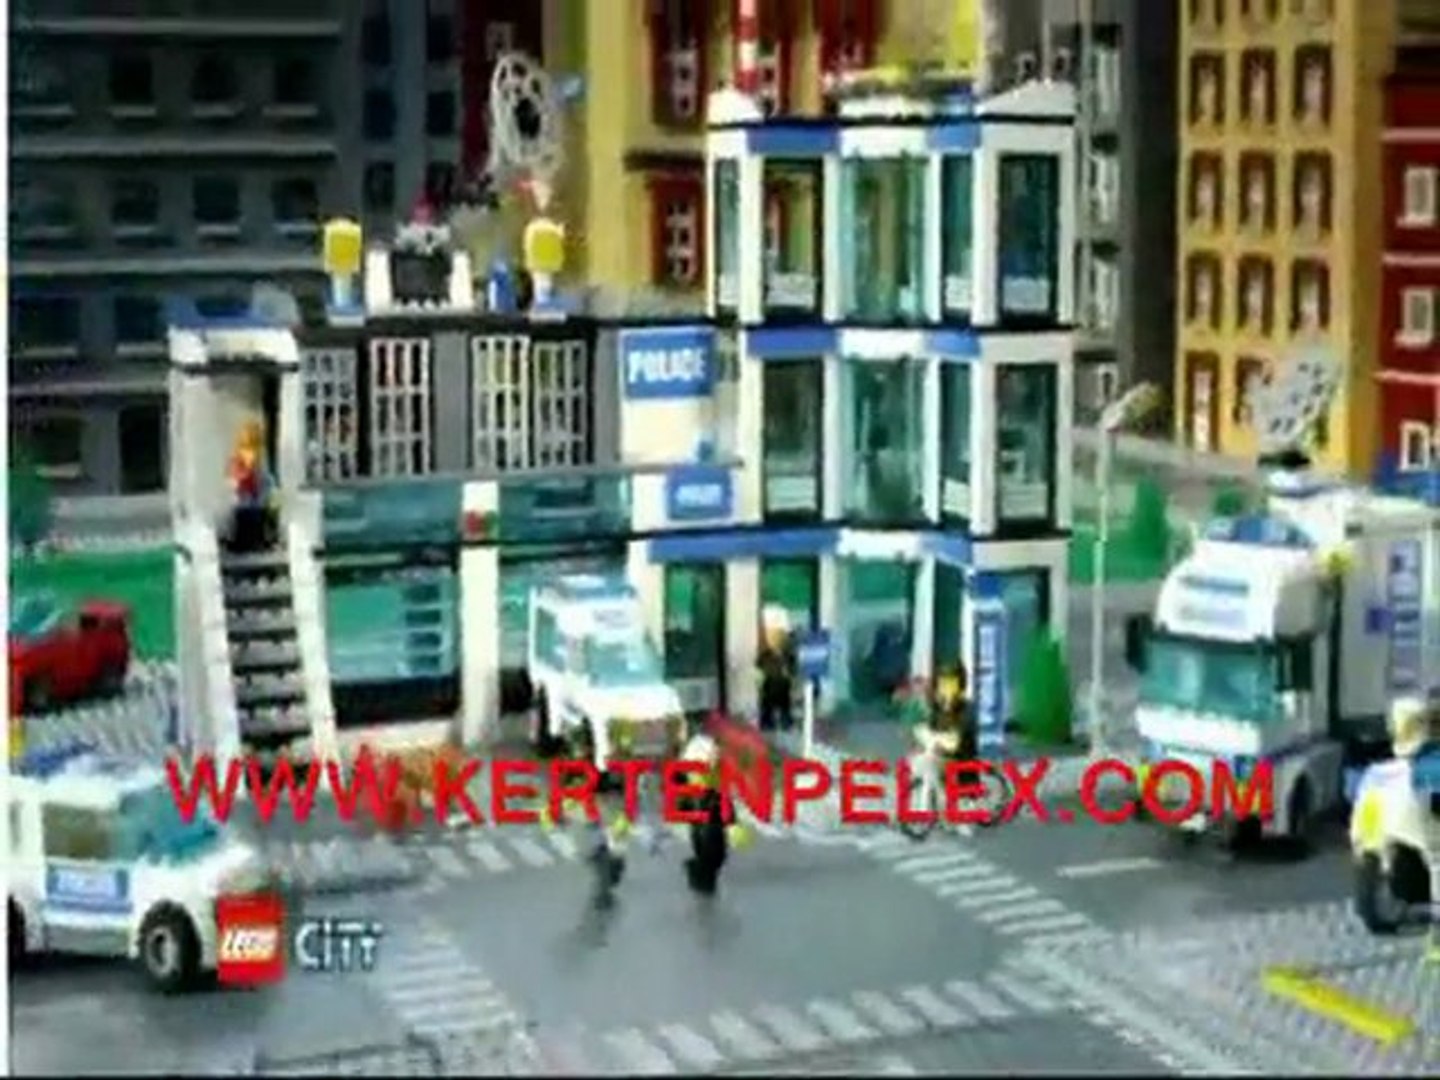 Lego City 2011 Police Commercial 1 - Dailymotion Video